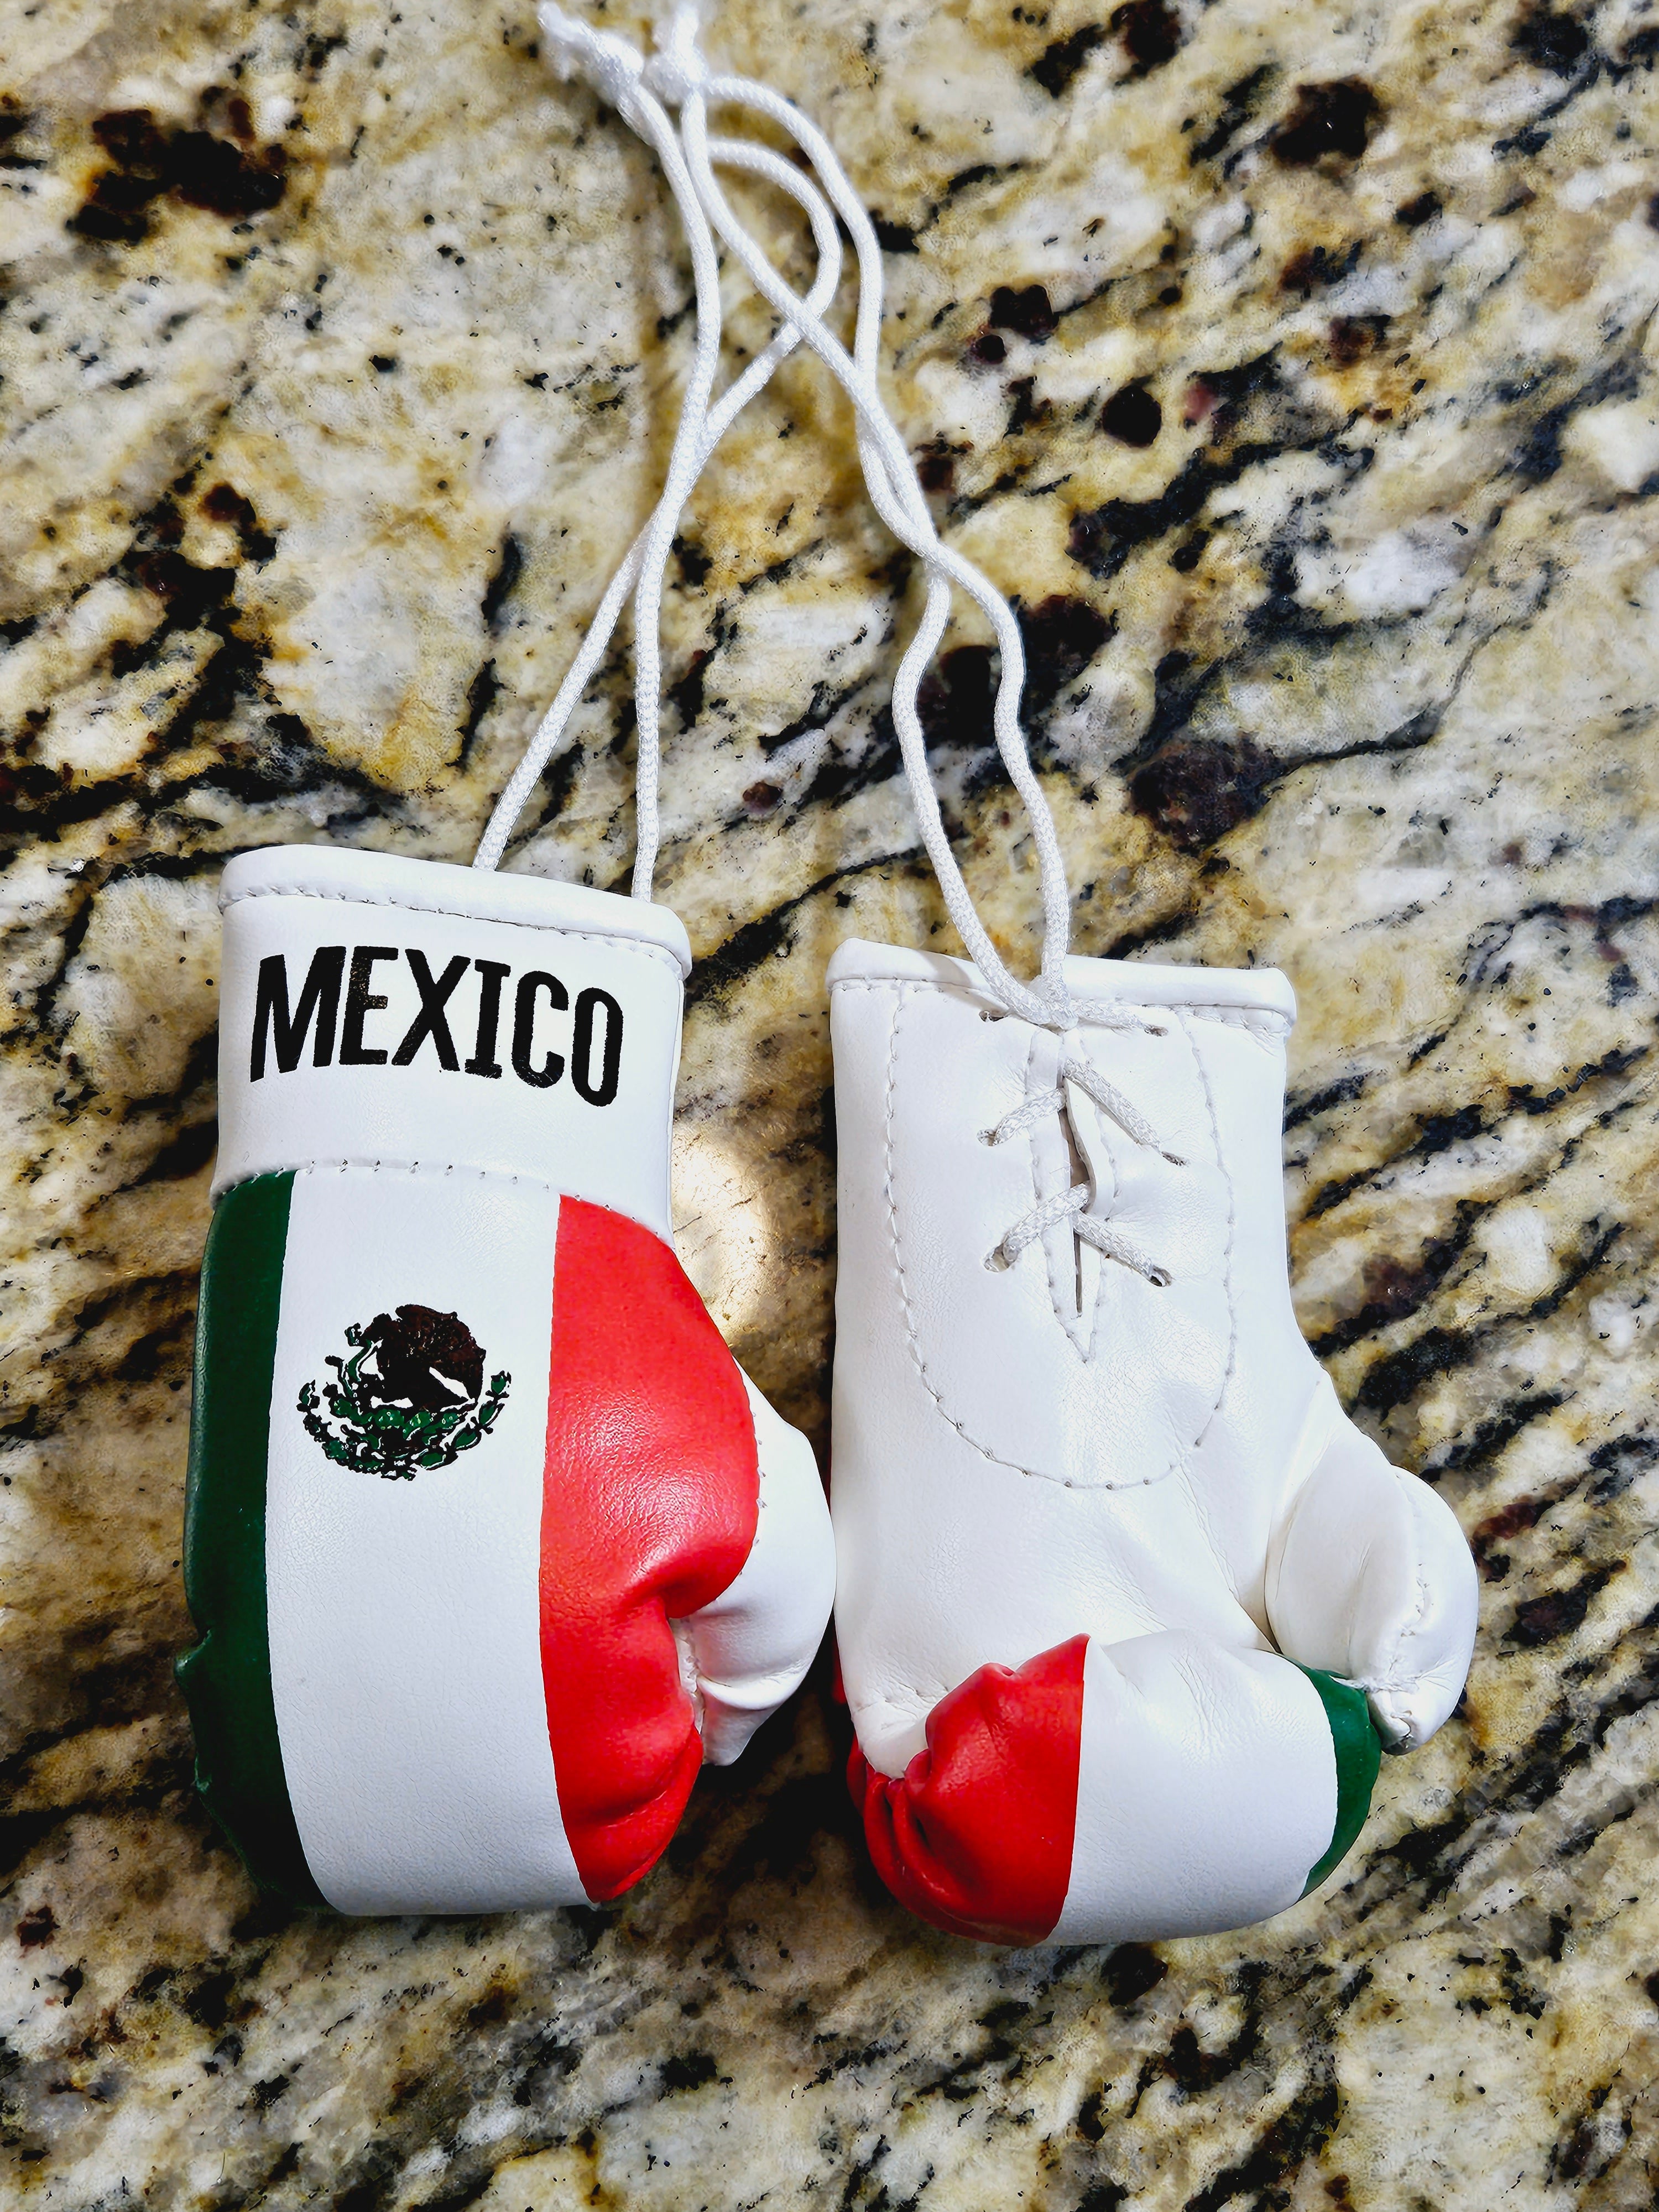 Country Flag Mini Boxing Gloves For Hanging - Habibi Heritage